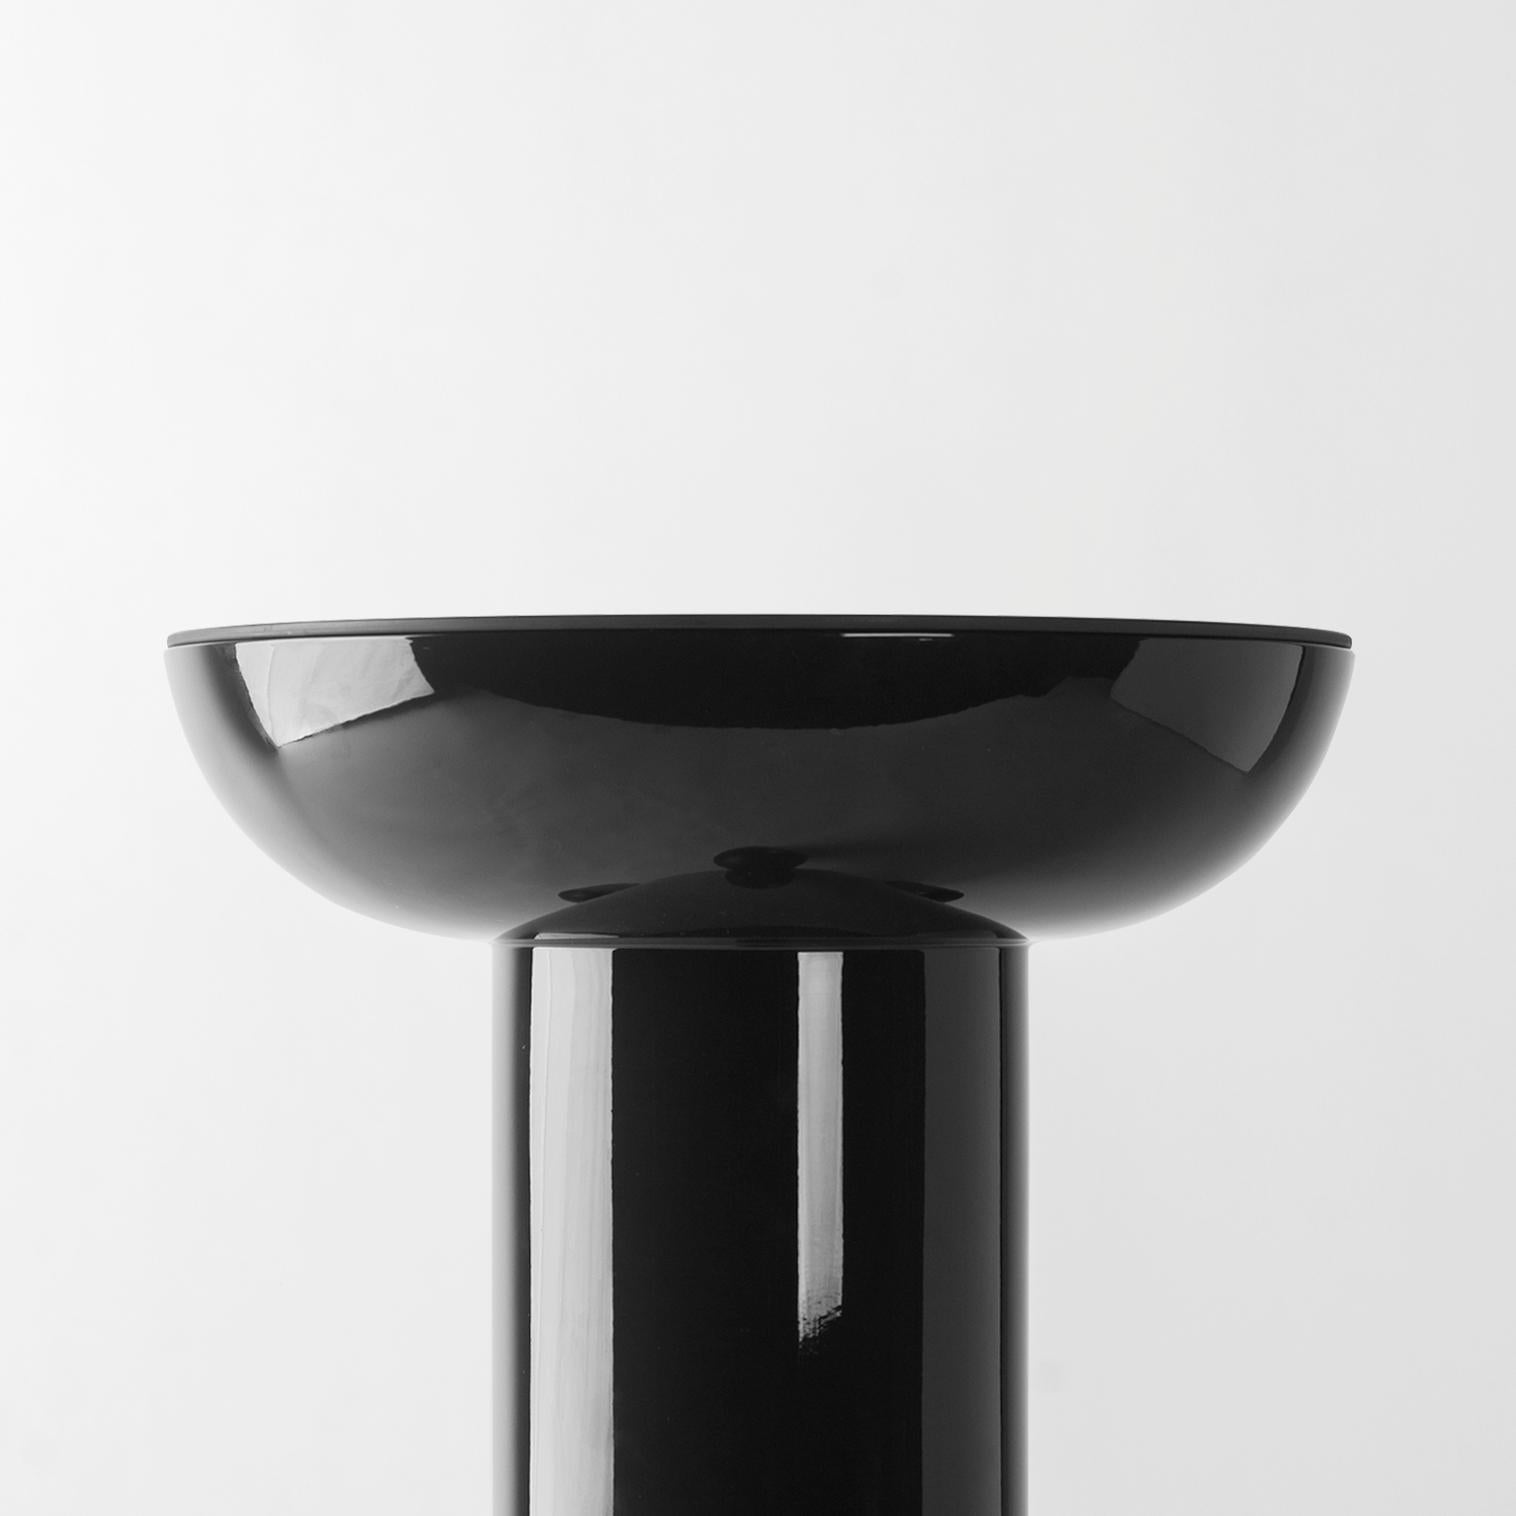 Dark Grey Explorer #03 table

Design by Jaime Hayon, 2019
Manufactured by BD Barcelona.

Laquered fibreglass body. Solid turned wooden legs and lacquered. Painted glass table top.

Measures: 40 Ø x 50 cm

- Glass: RAL 7021
- Body: RAL 7021 gloss
-